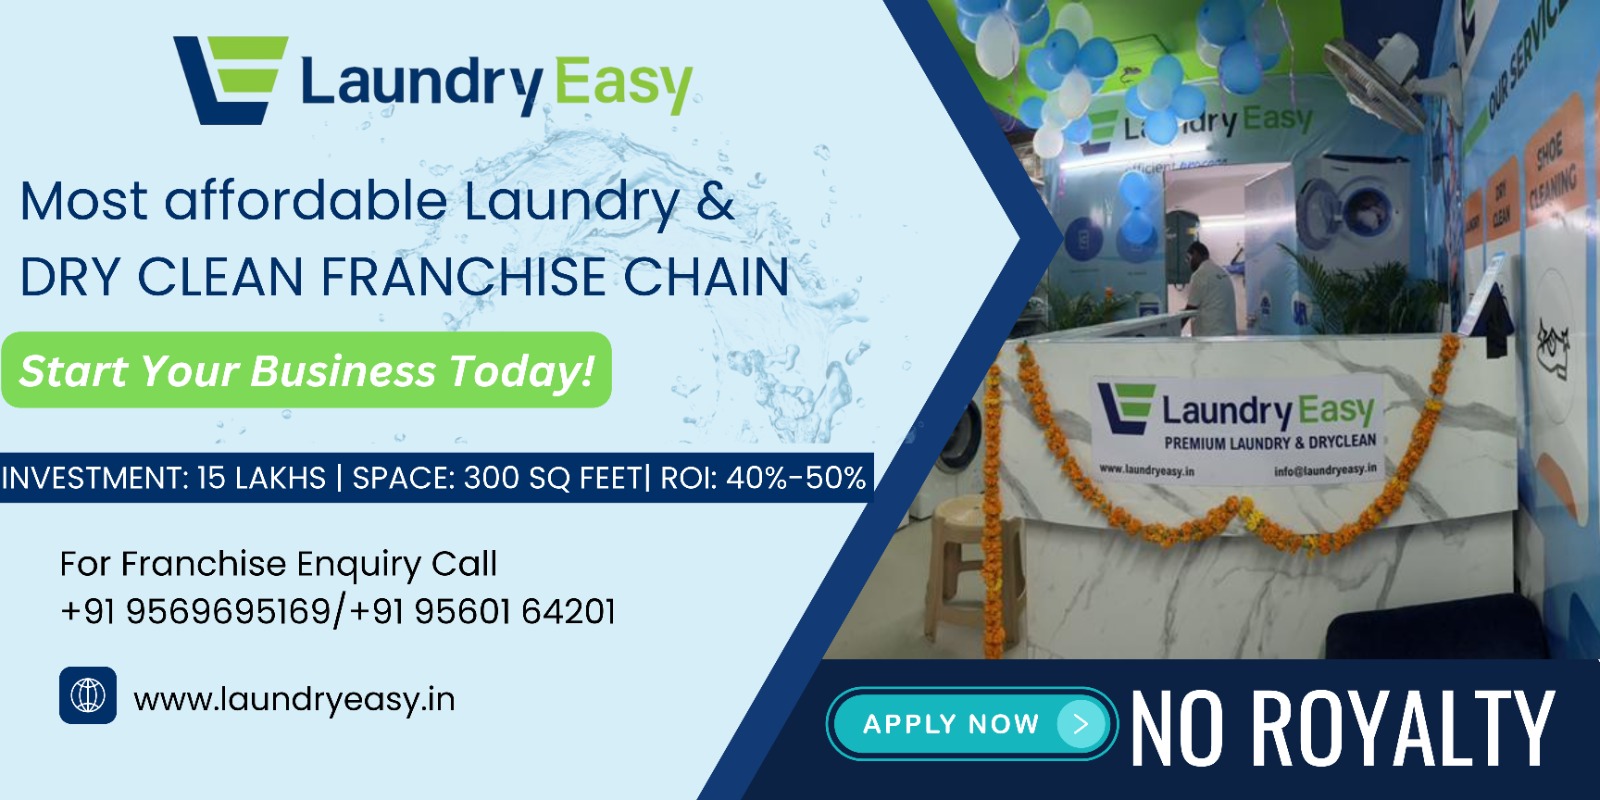 admin/uploads/brand_registration/Laundry Easy - Fastest Growing Laundry & Dry Cleaning Chain